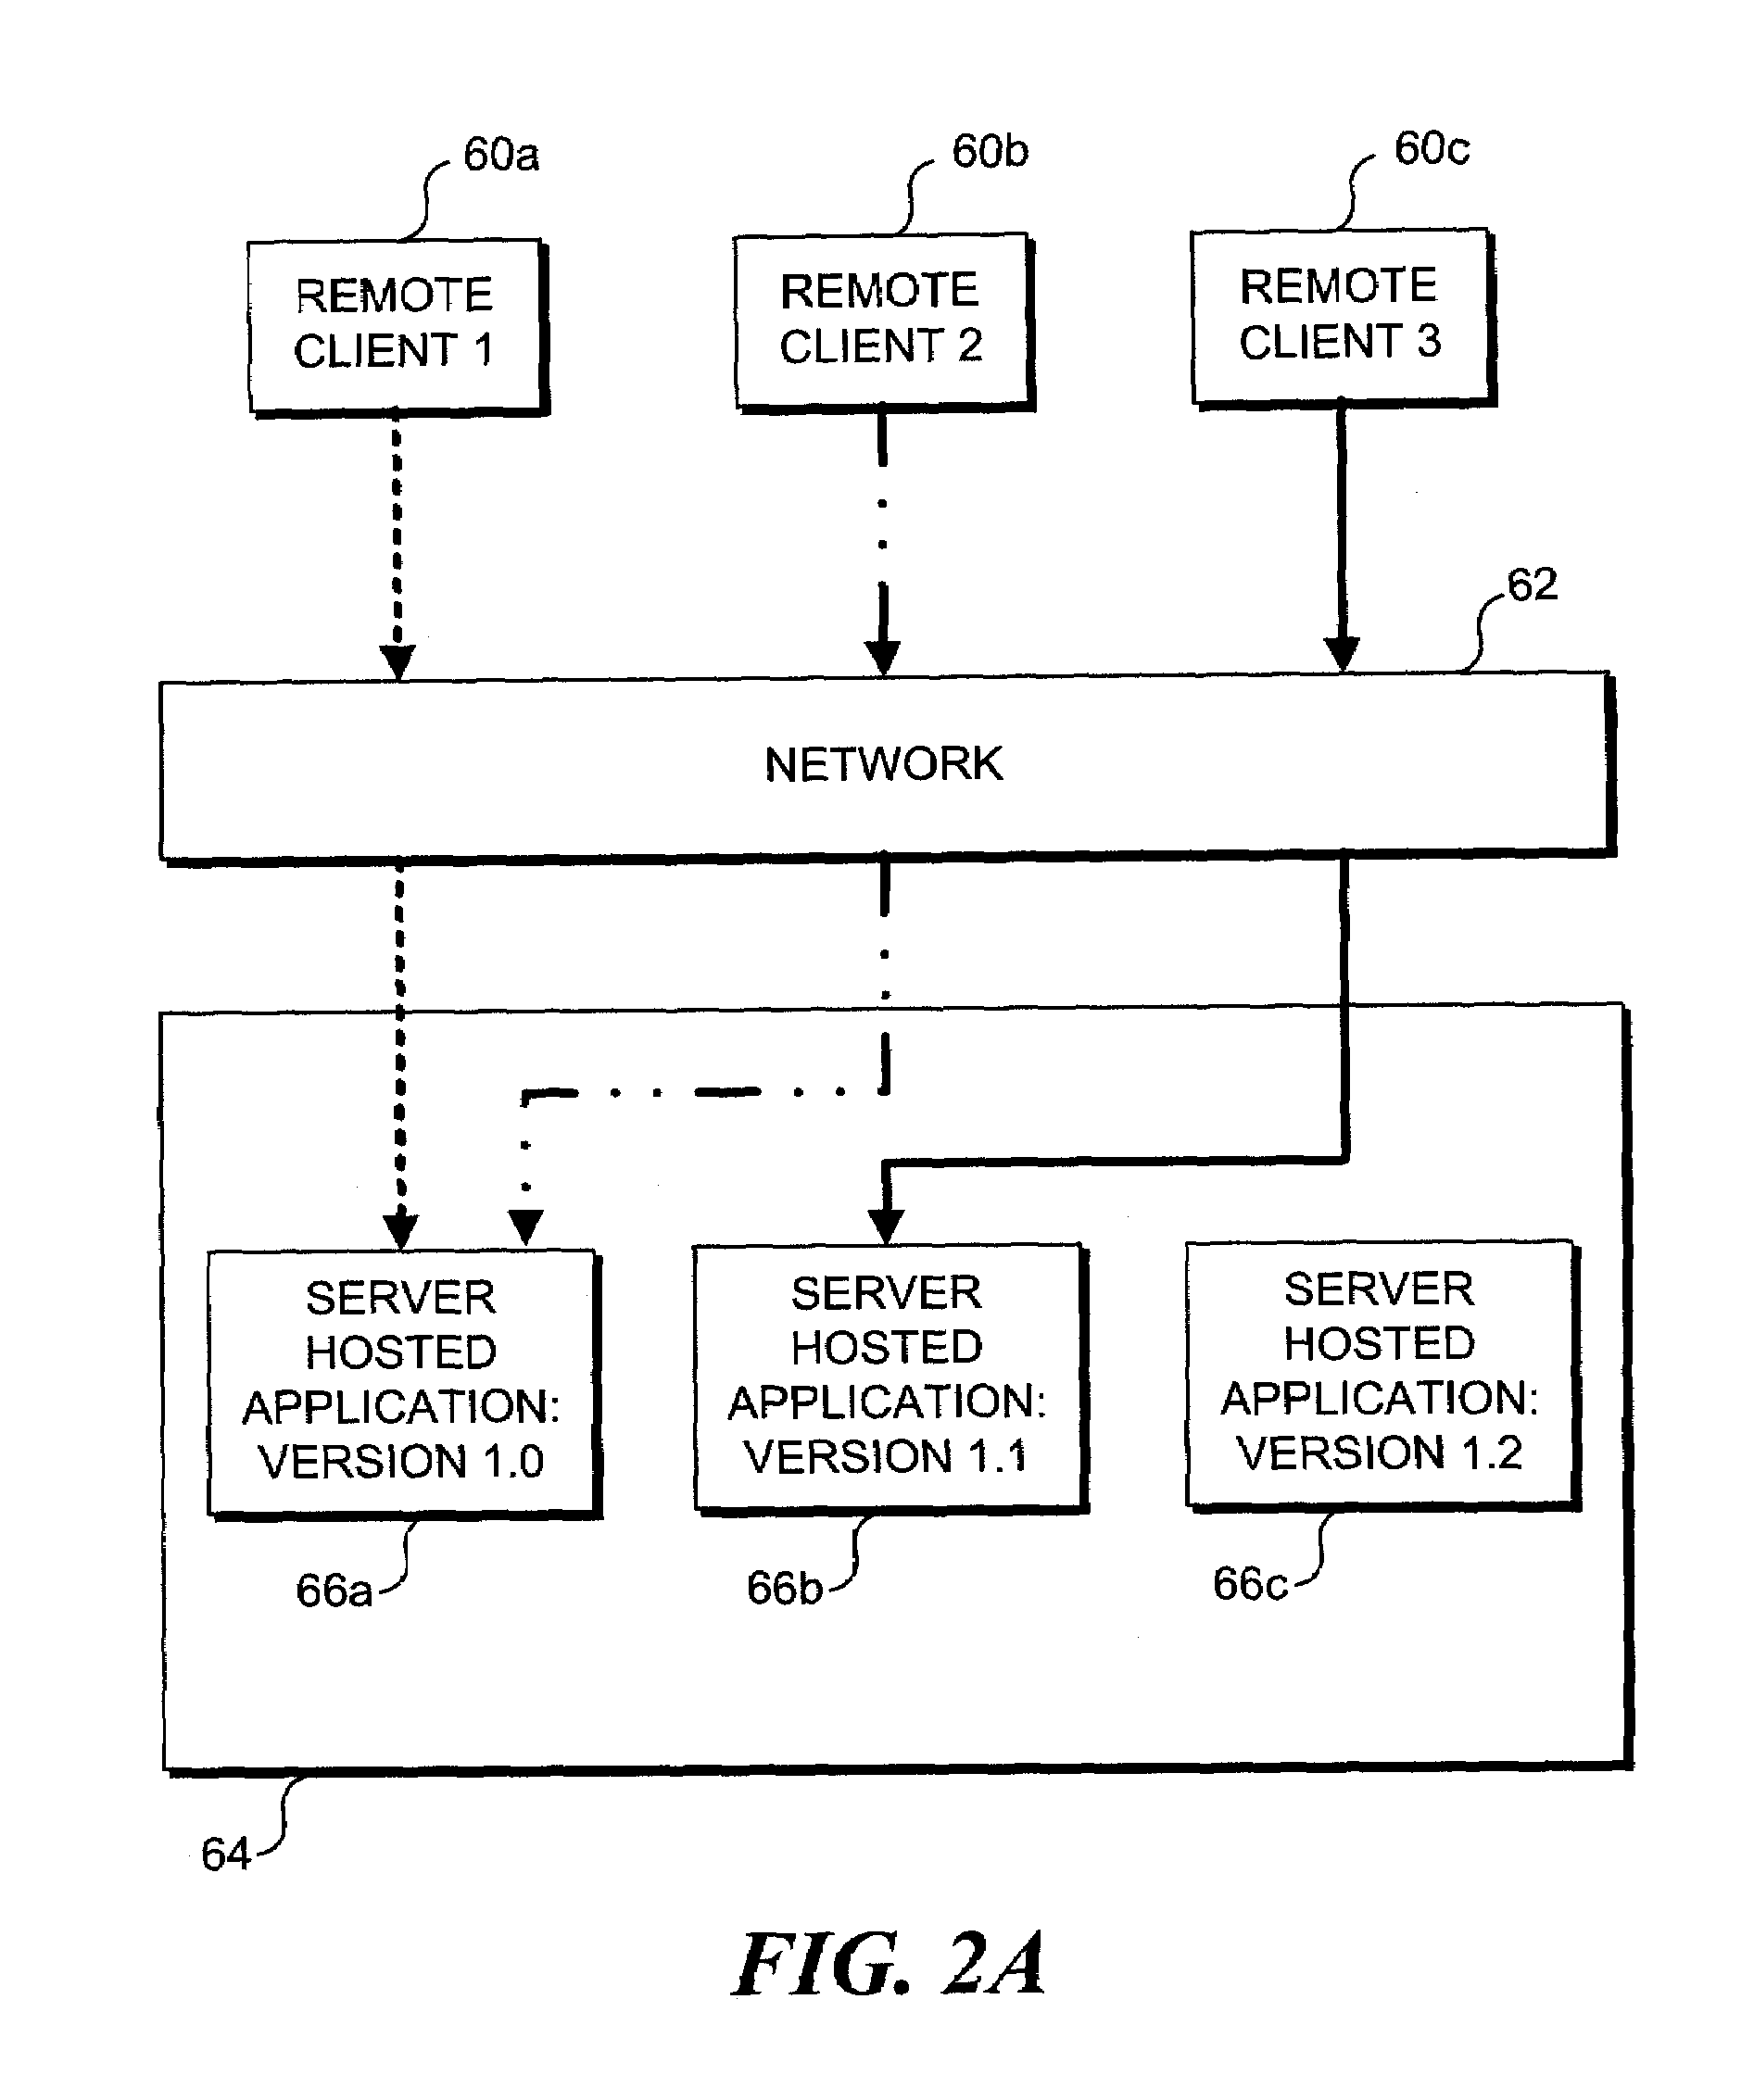 Method and apparatus enabling migration of clients to a specific version of a server-hosted application, where multiple software versions of the server-hosted application are installed on a network